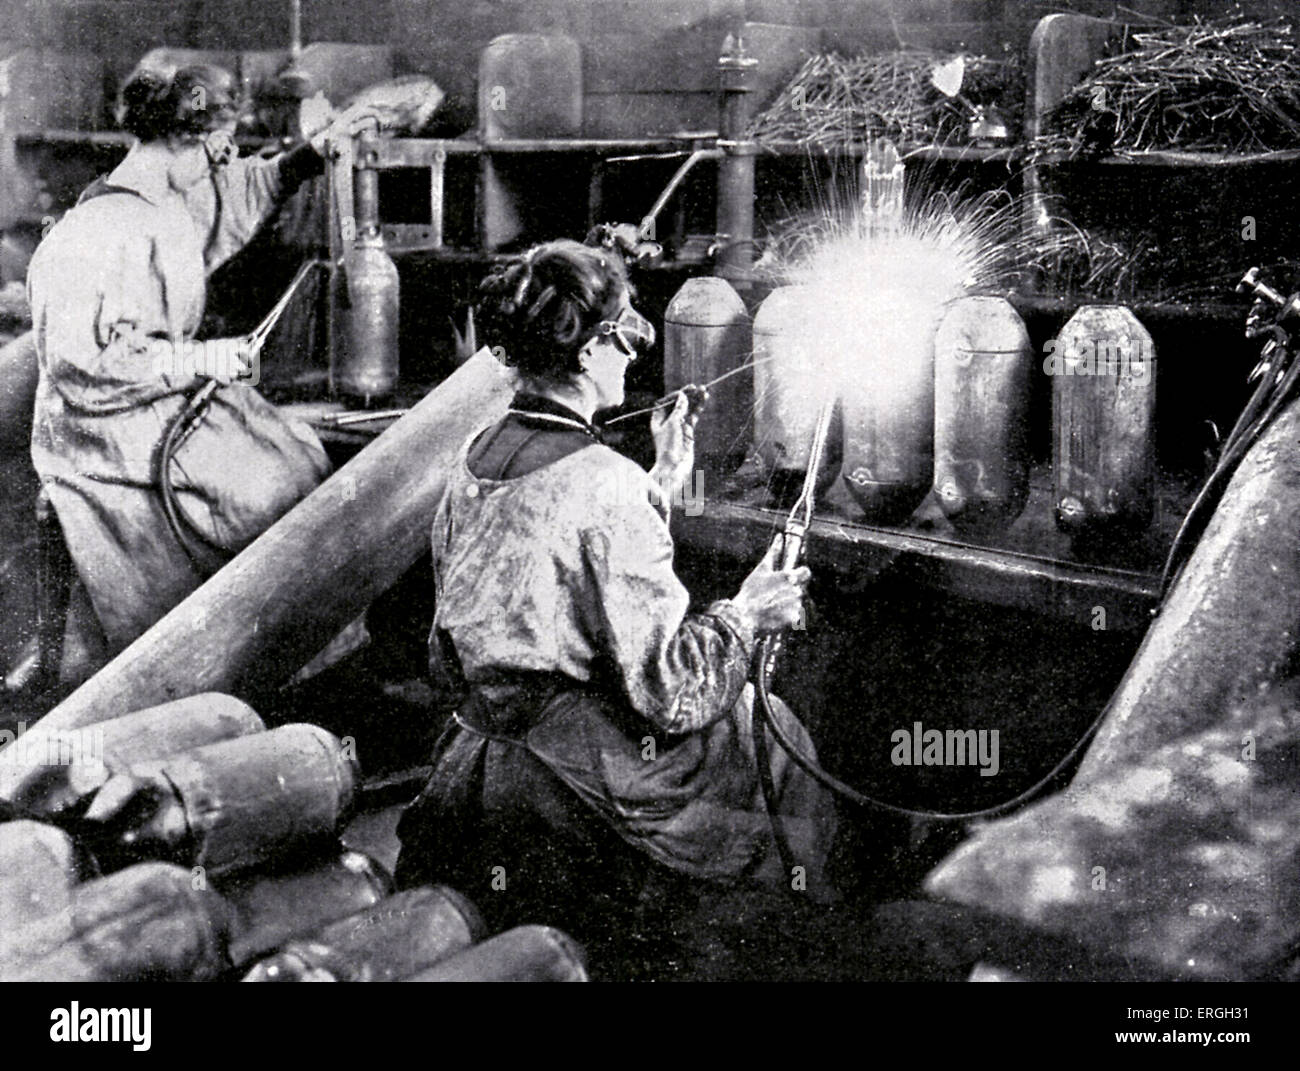 French women working in munitions factory during World War 1. April 1916. Finishing shell cases. Stock Photo